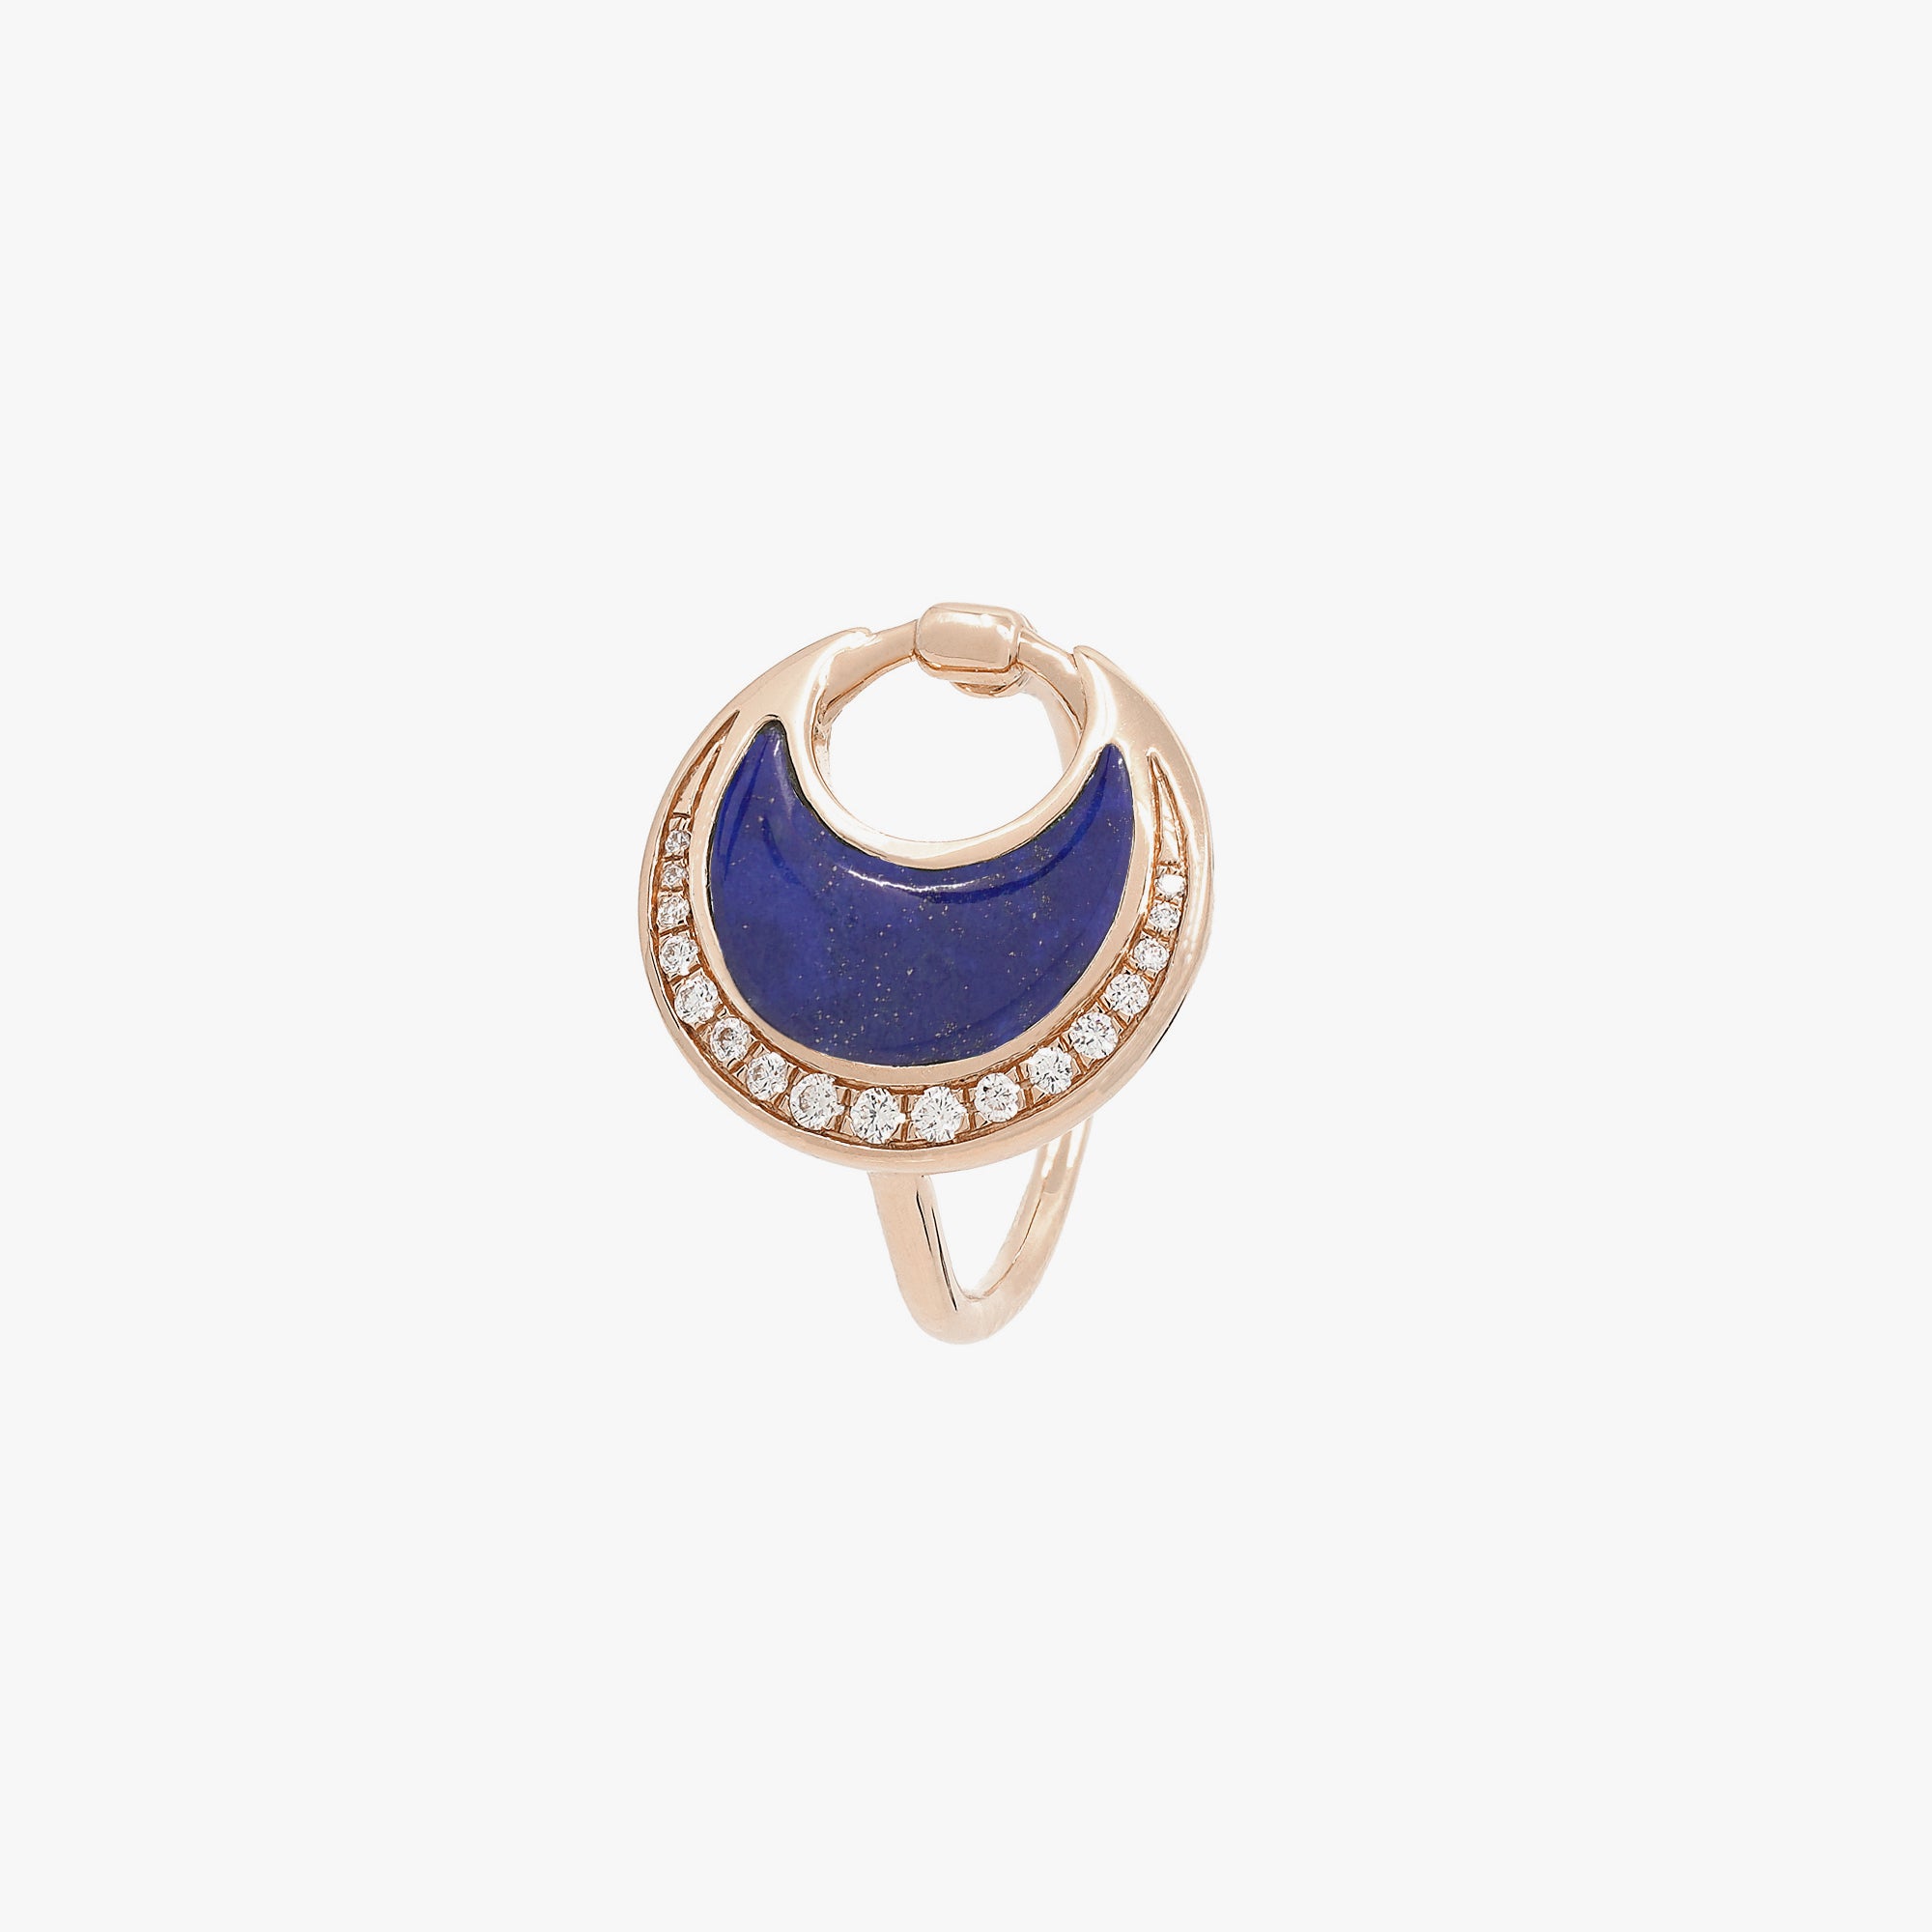 Al Hilal ring in rose gold with lapis stone and diamonds